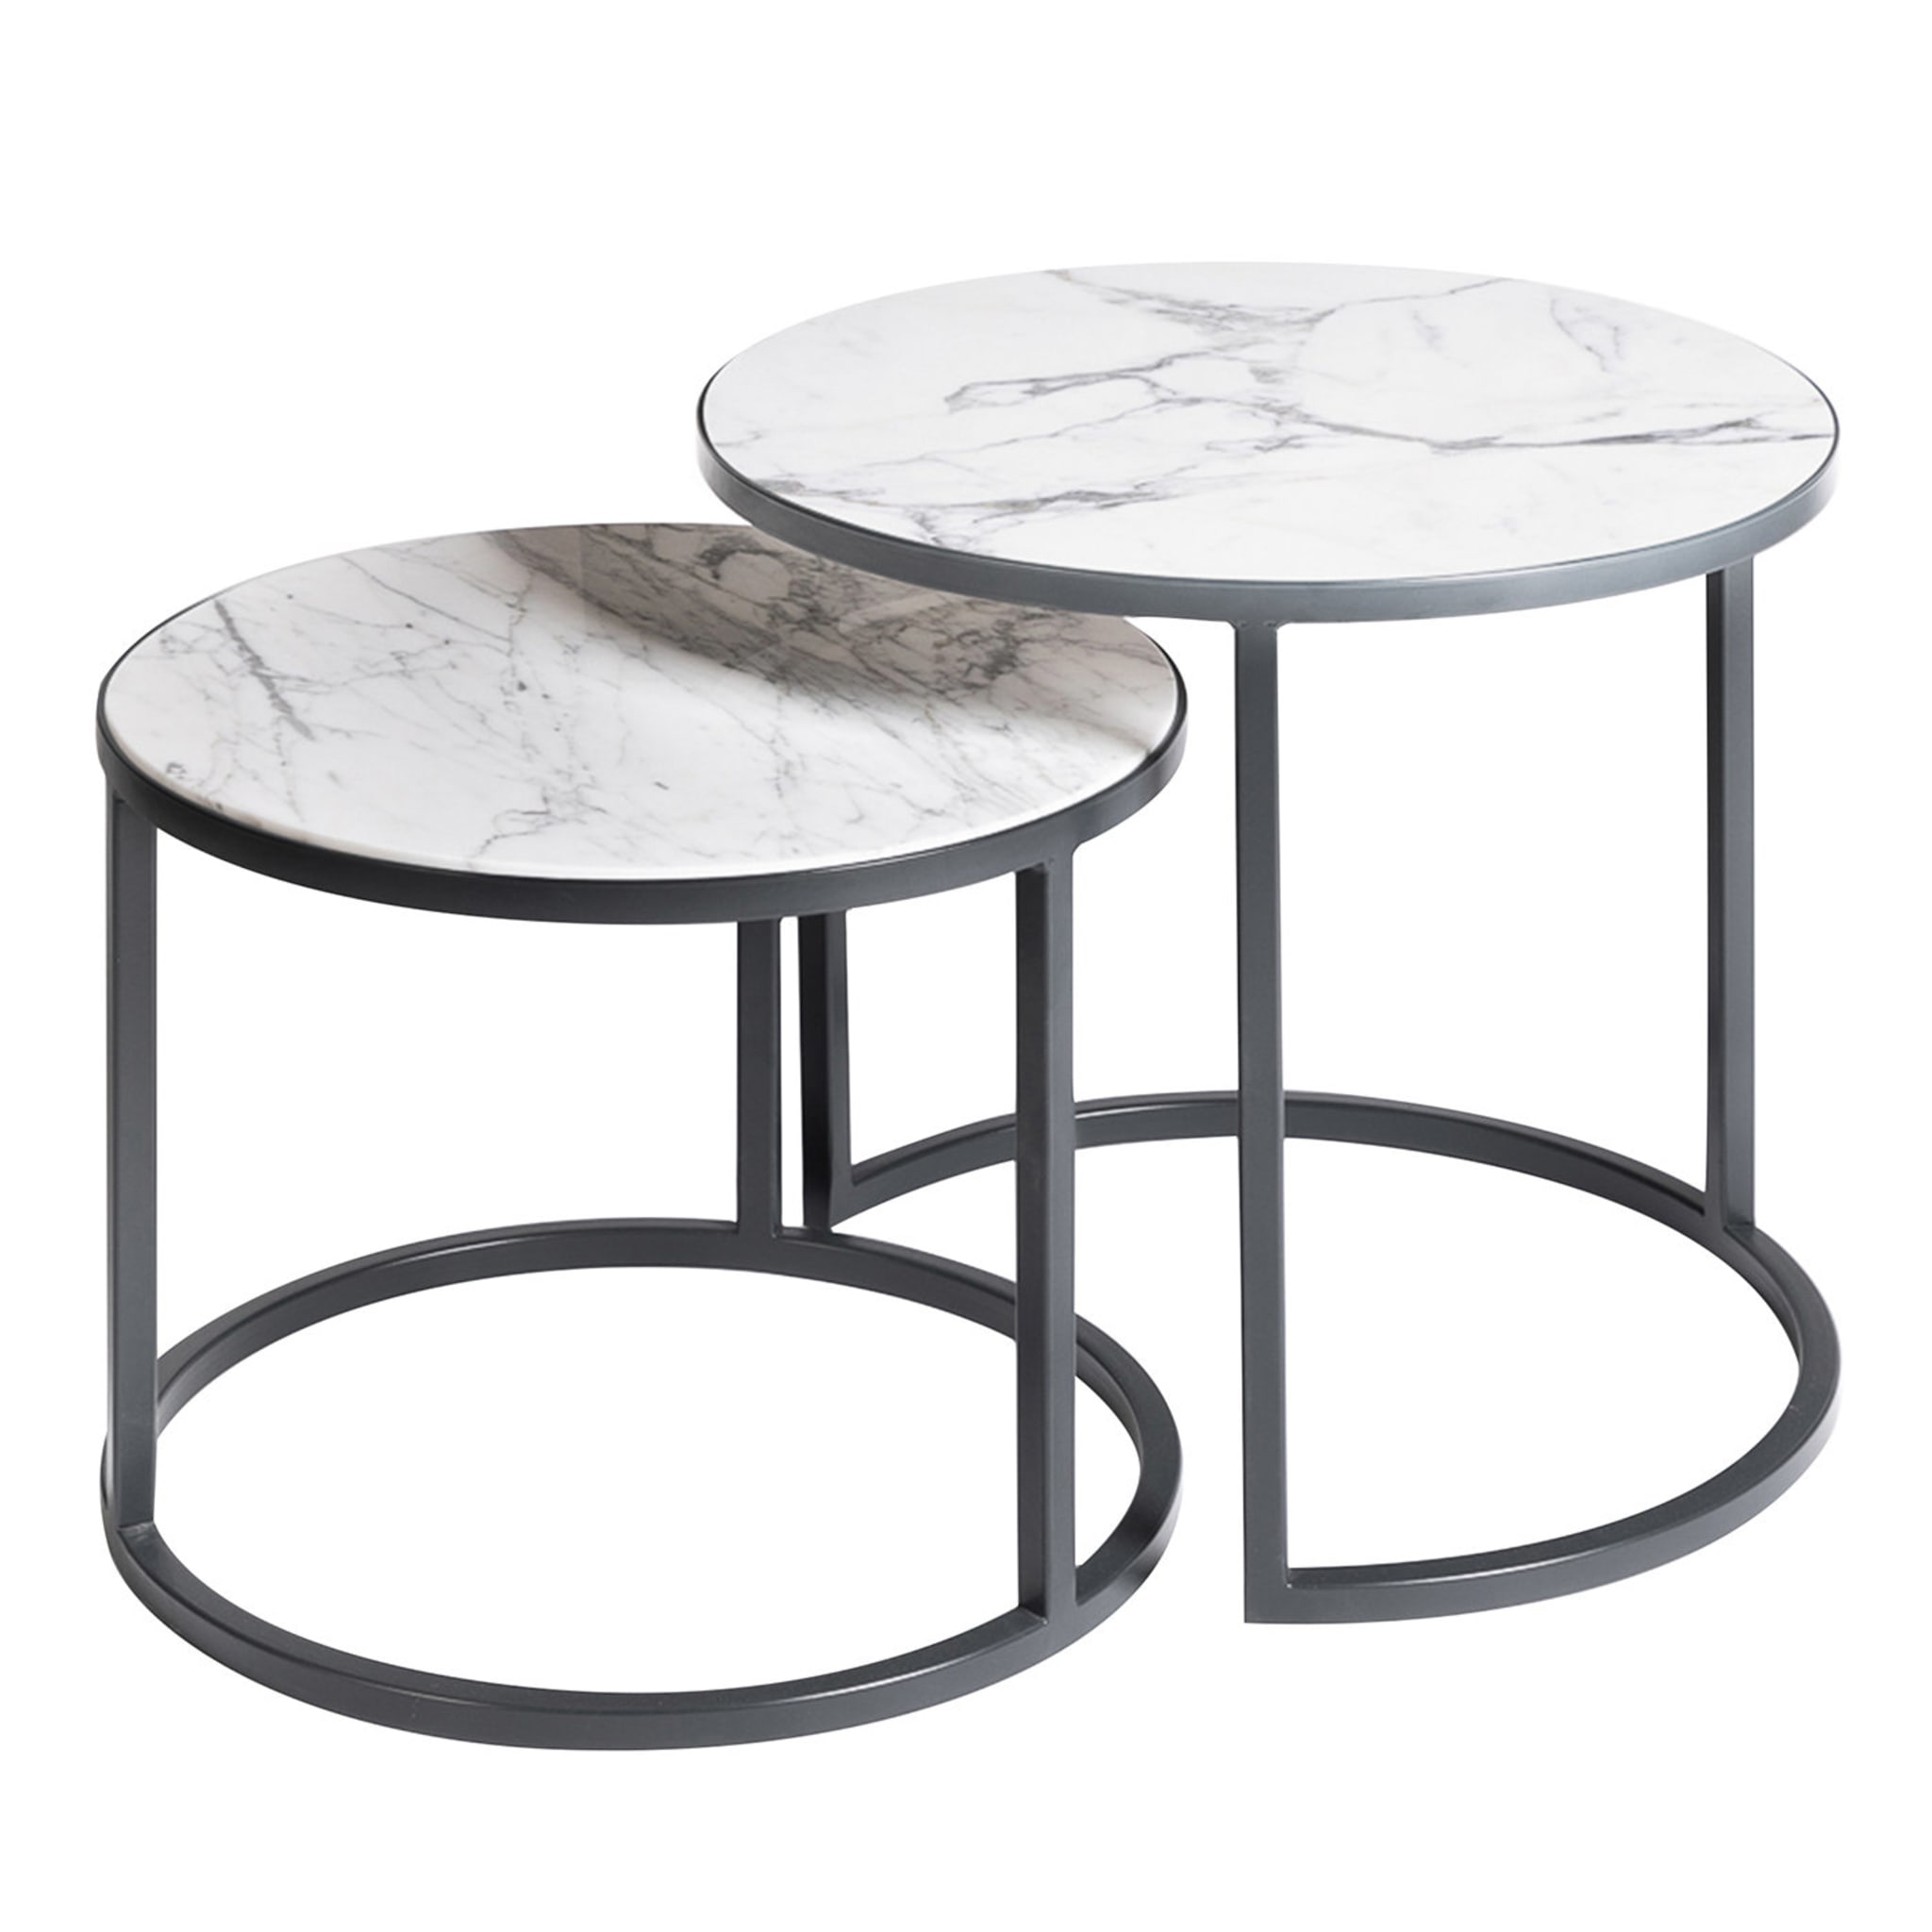 Alicudi and Filicudi Set of 2 Carrara Round Coffee Tables  - Alternative view 1